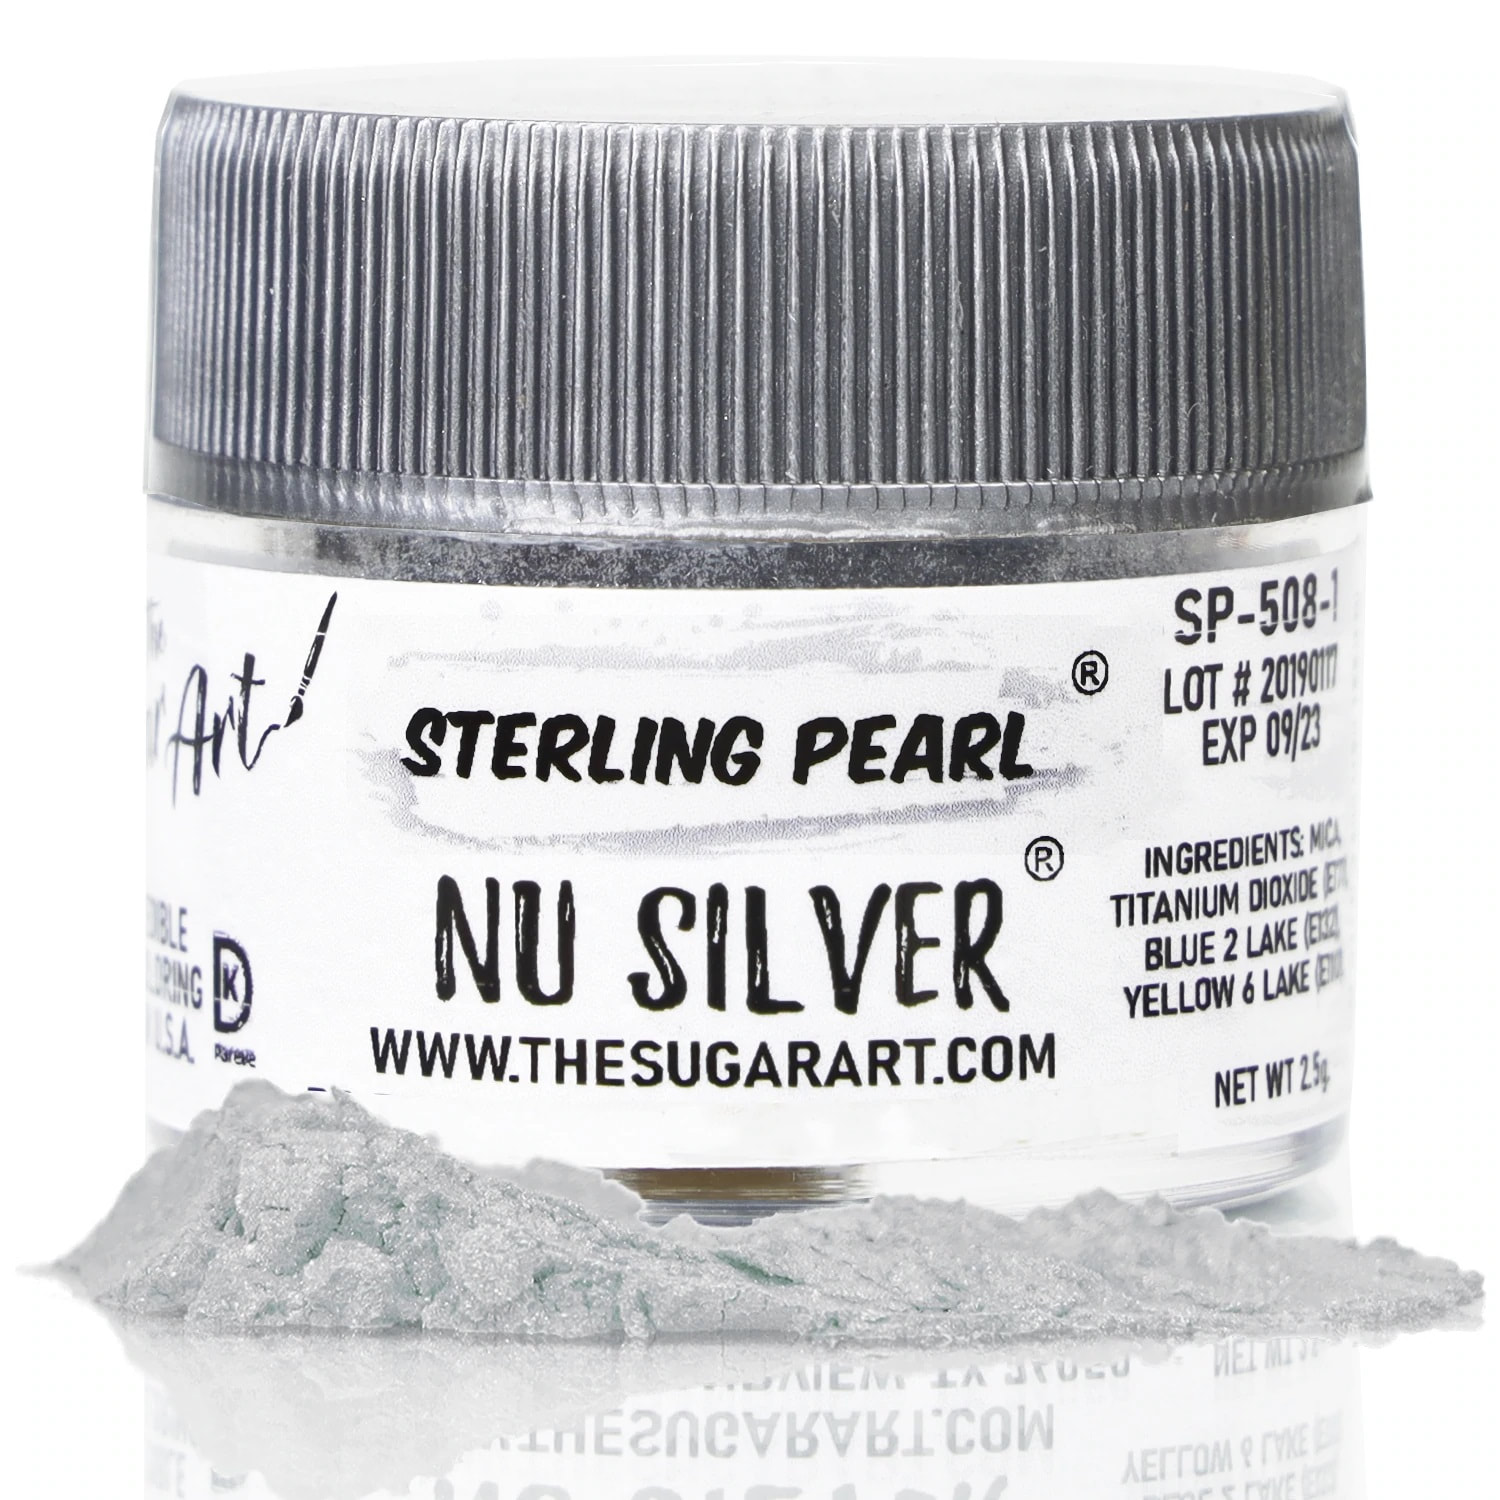 The Sugar Art's Sterling Pearls